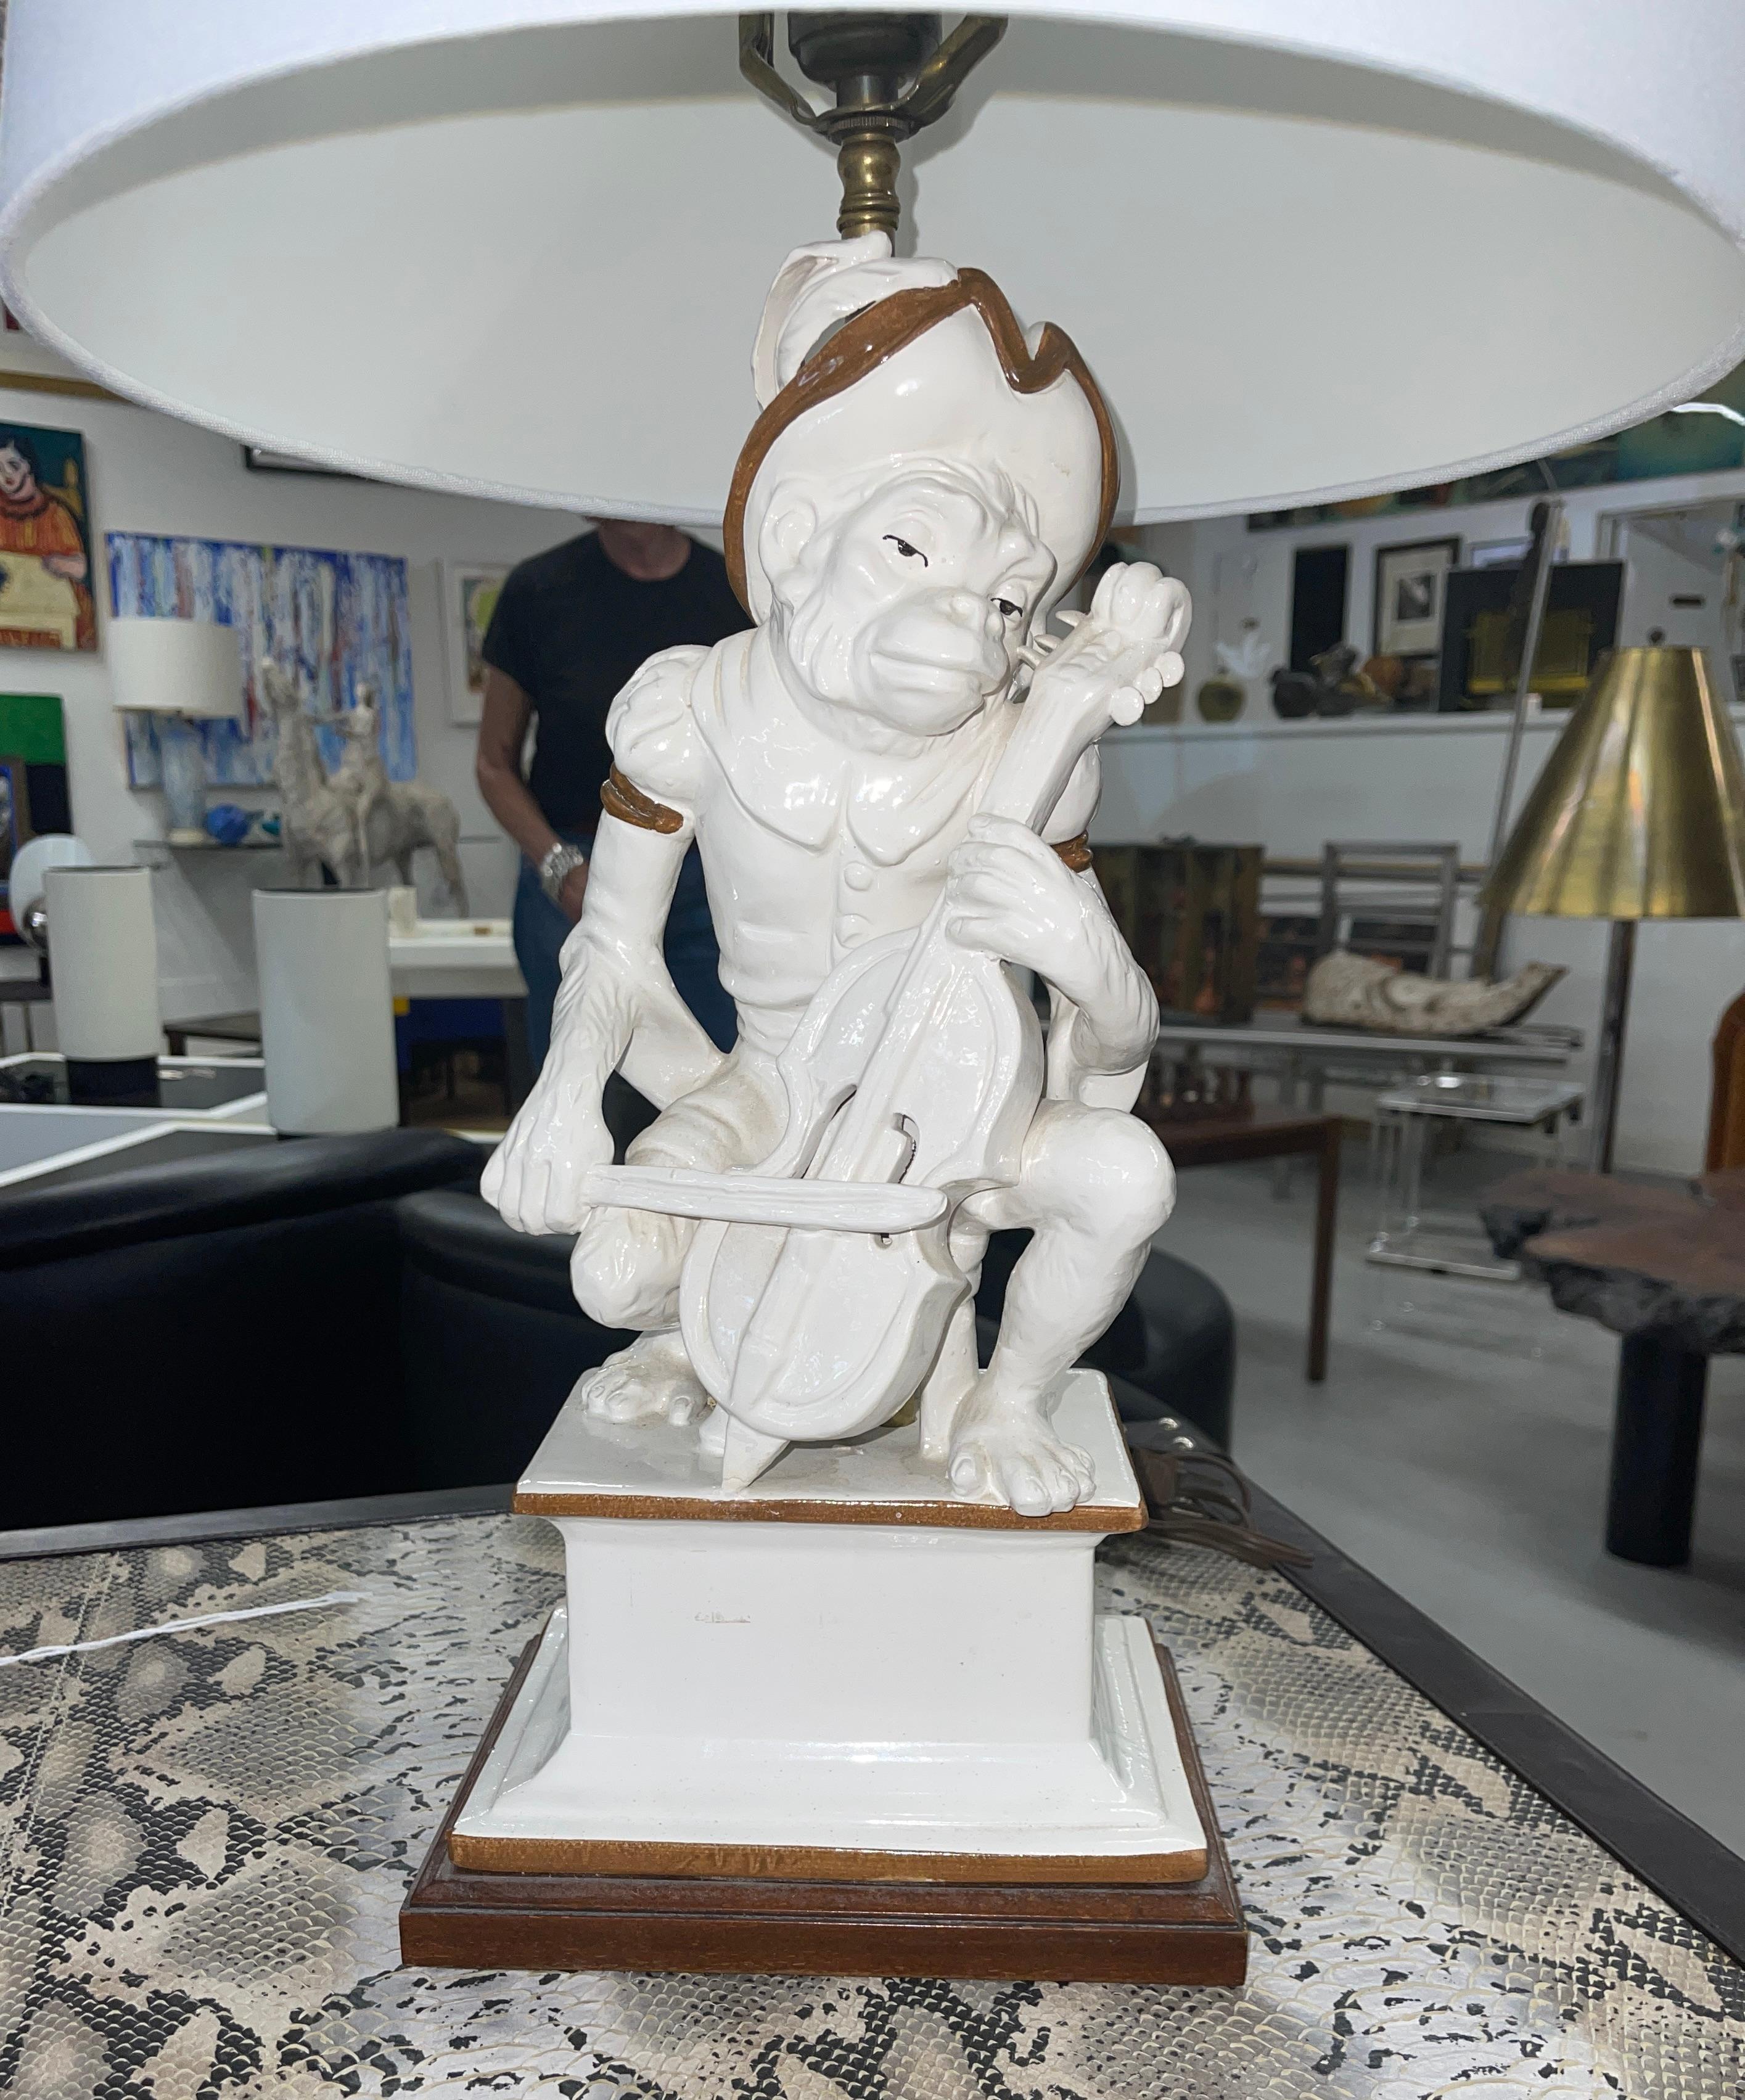 Whimsical Ceramic or Majolica Italian Monkey lamp. The monkey is playing a musical instrument, likely a violin. Mounted on a wood base. The lamp is functioning and likely dates to the 60's or 70's. There is a noticeable chip to the base, pictured